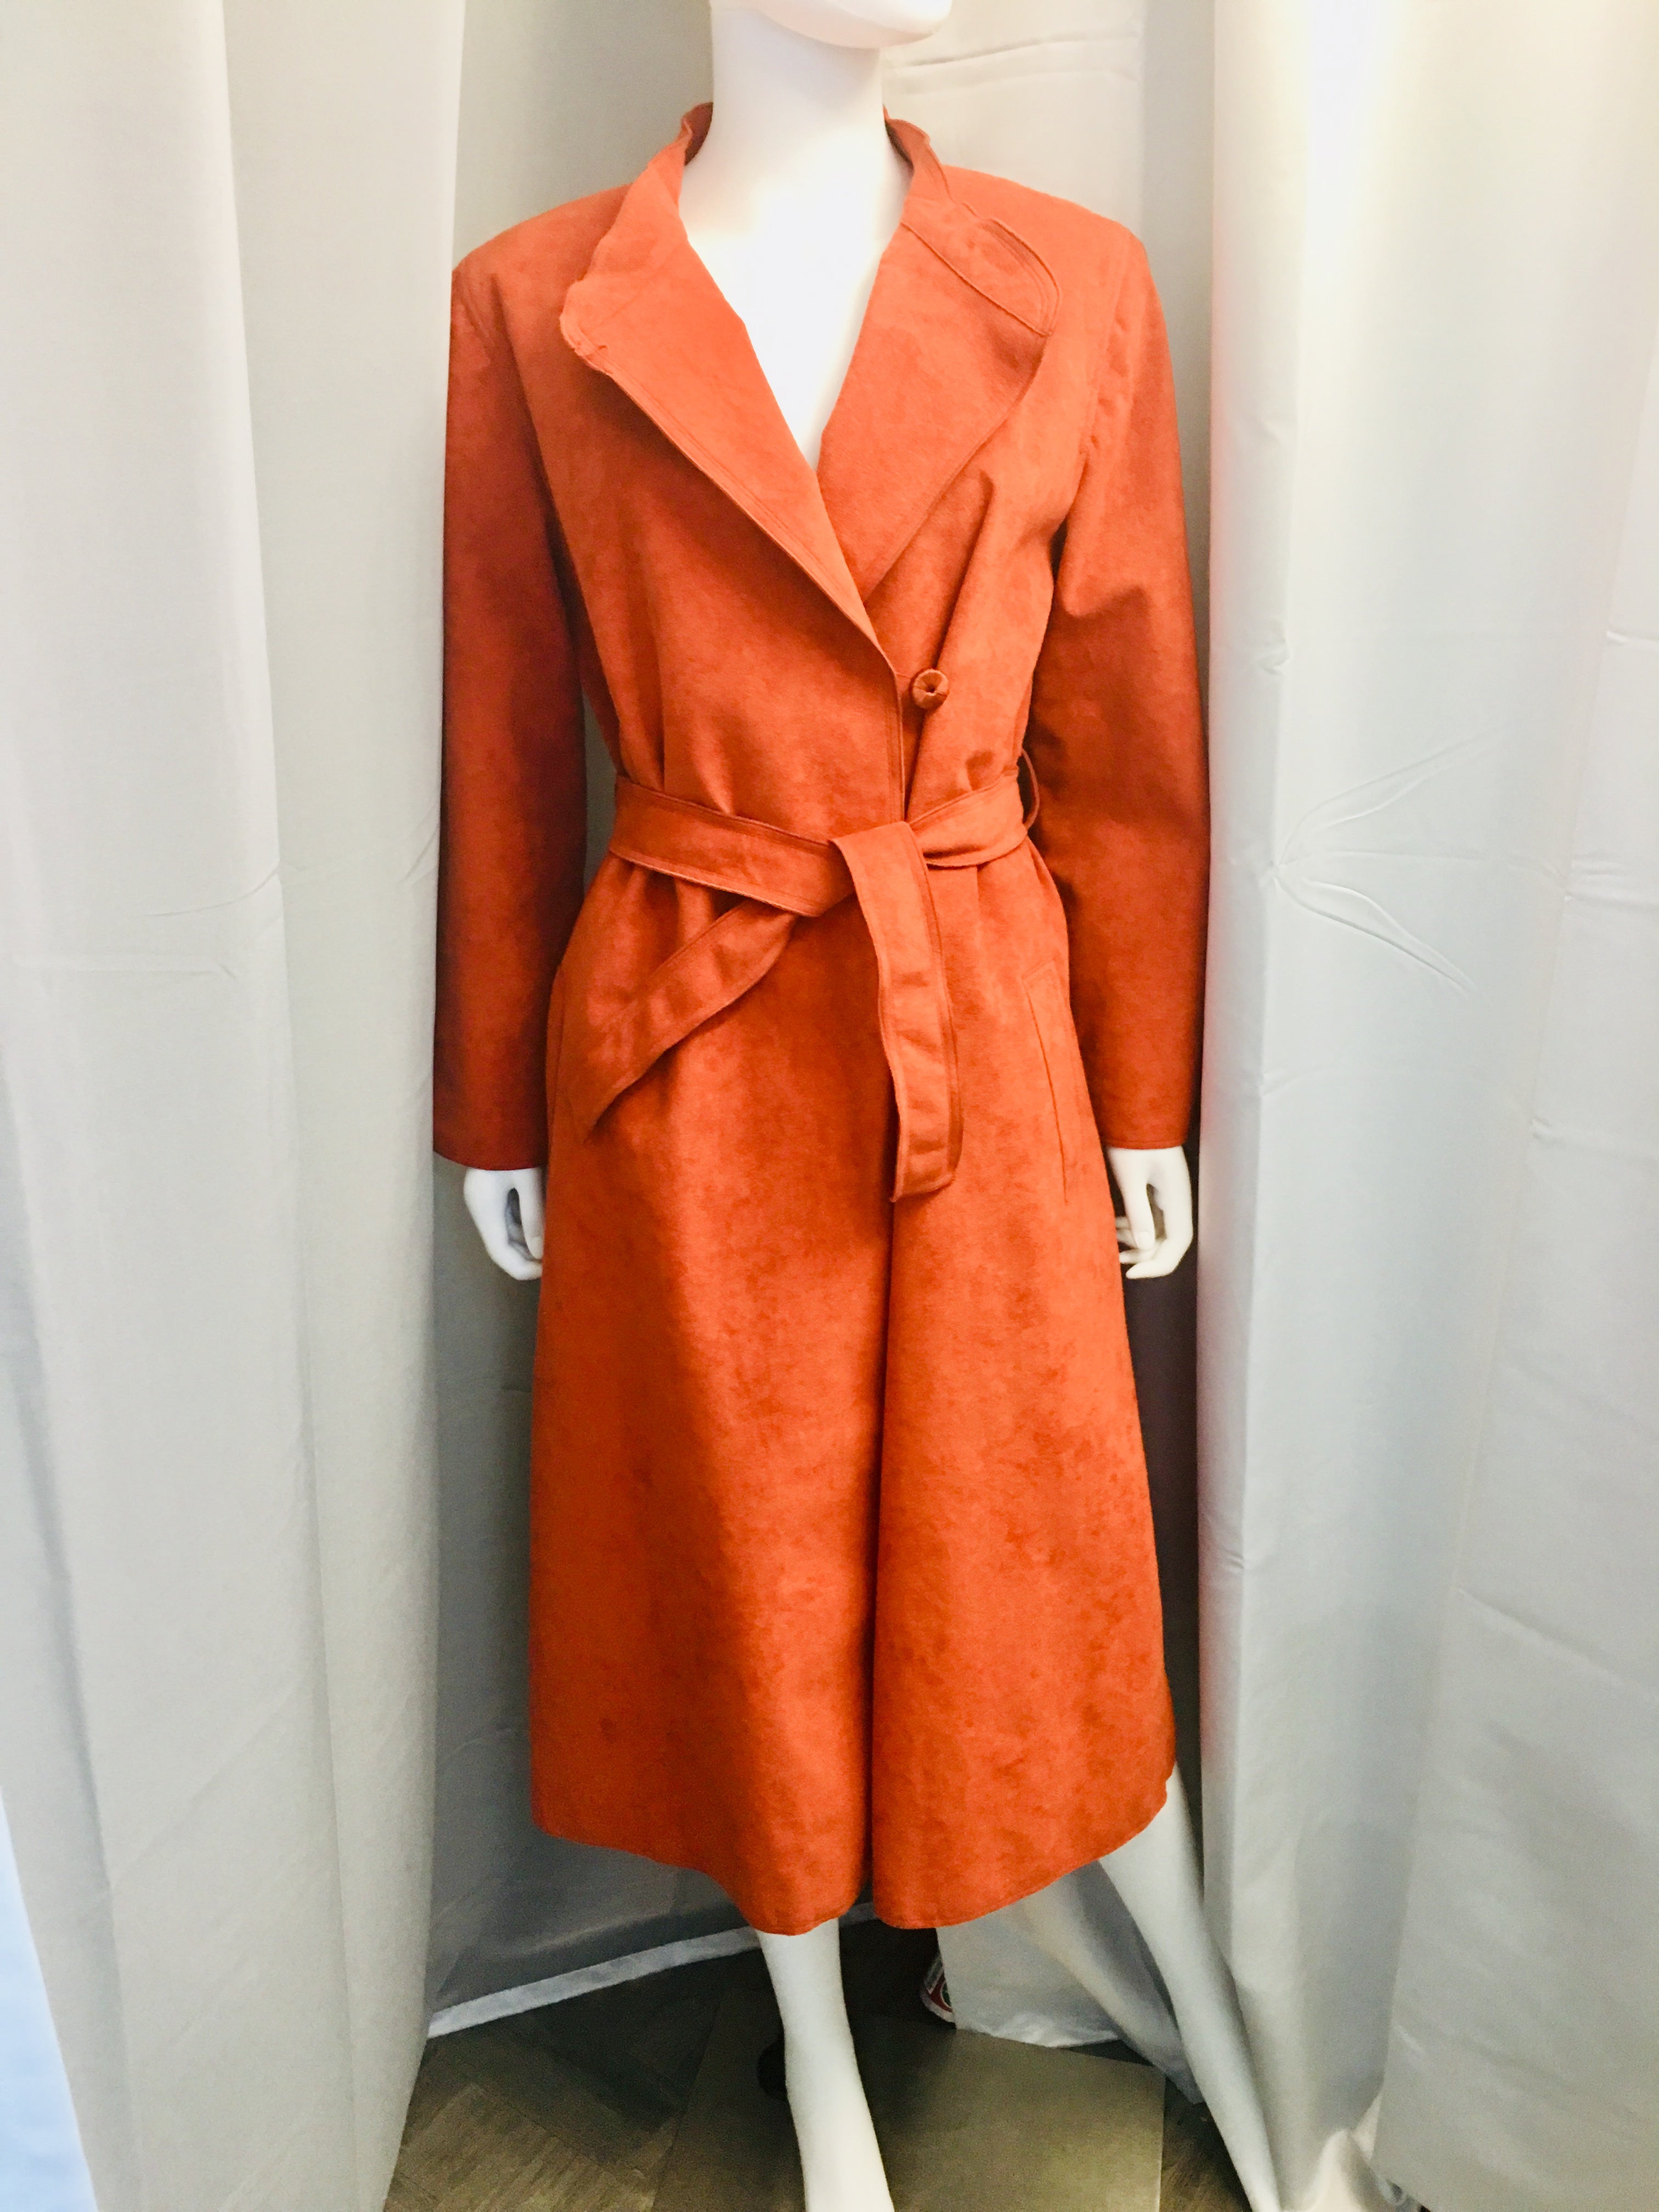 Sunday Claim Sale - Tom and Jerry trench coat pervs